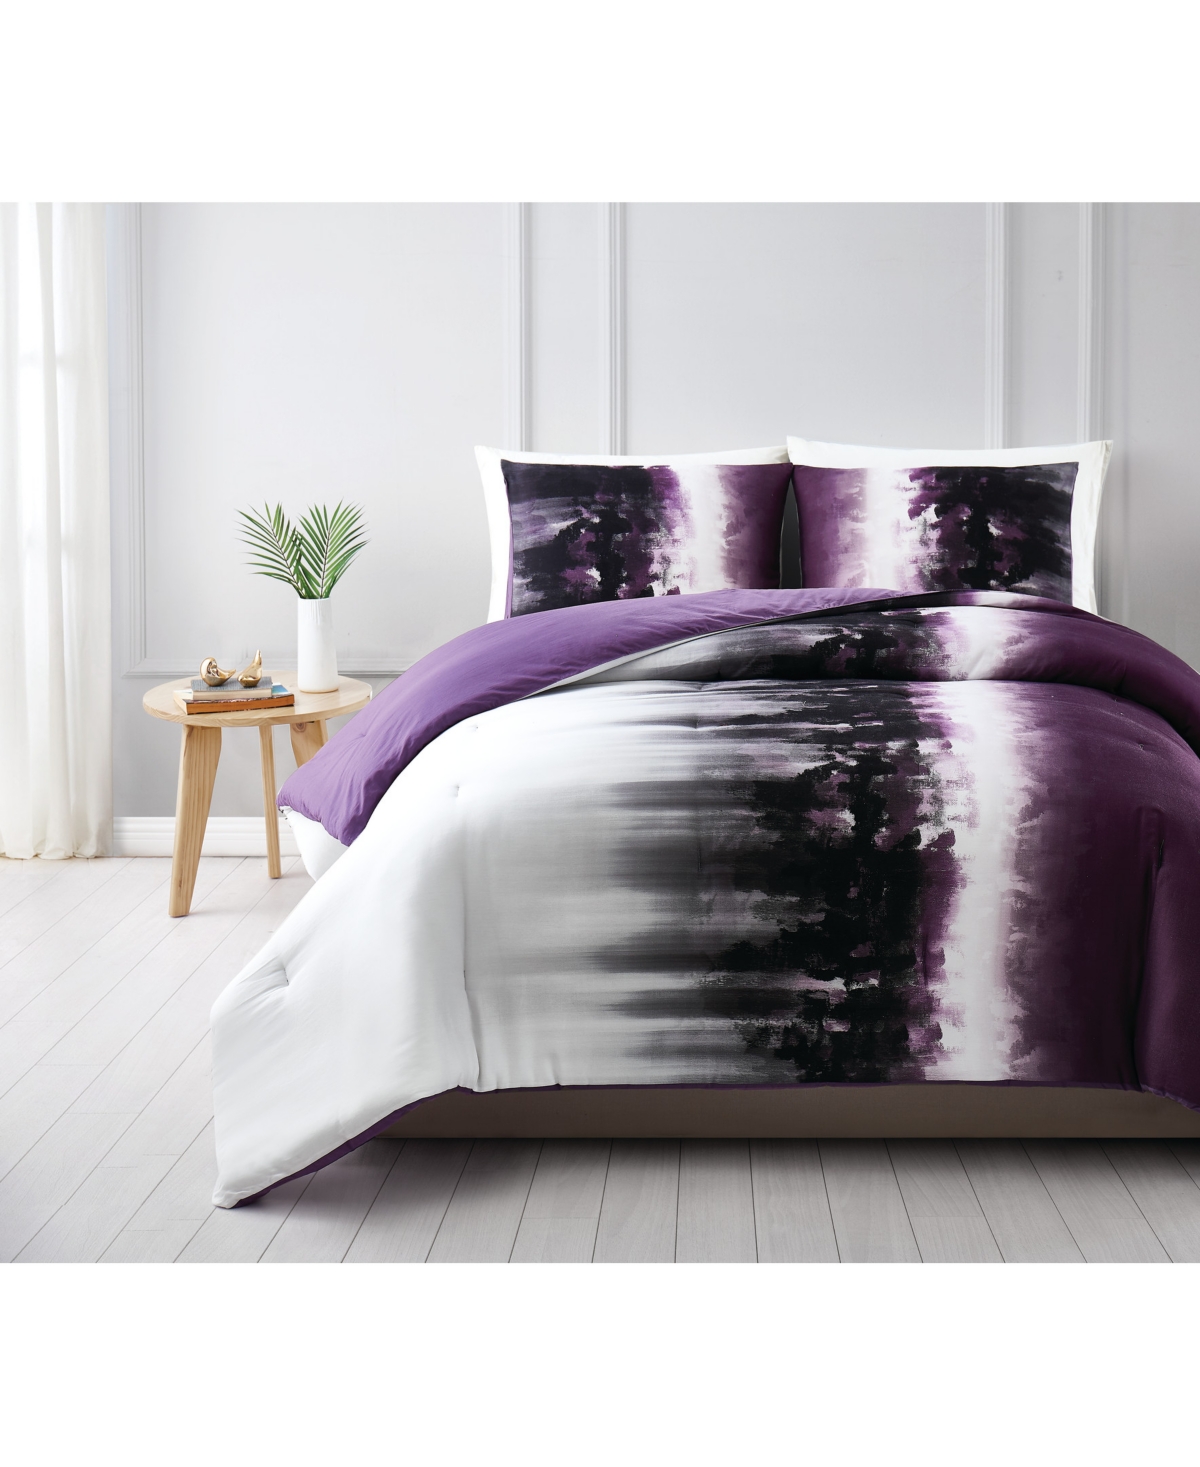 Vince Camuto Home Vince Camuto Mirrea King Comforter Set In White,purple